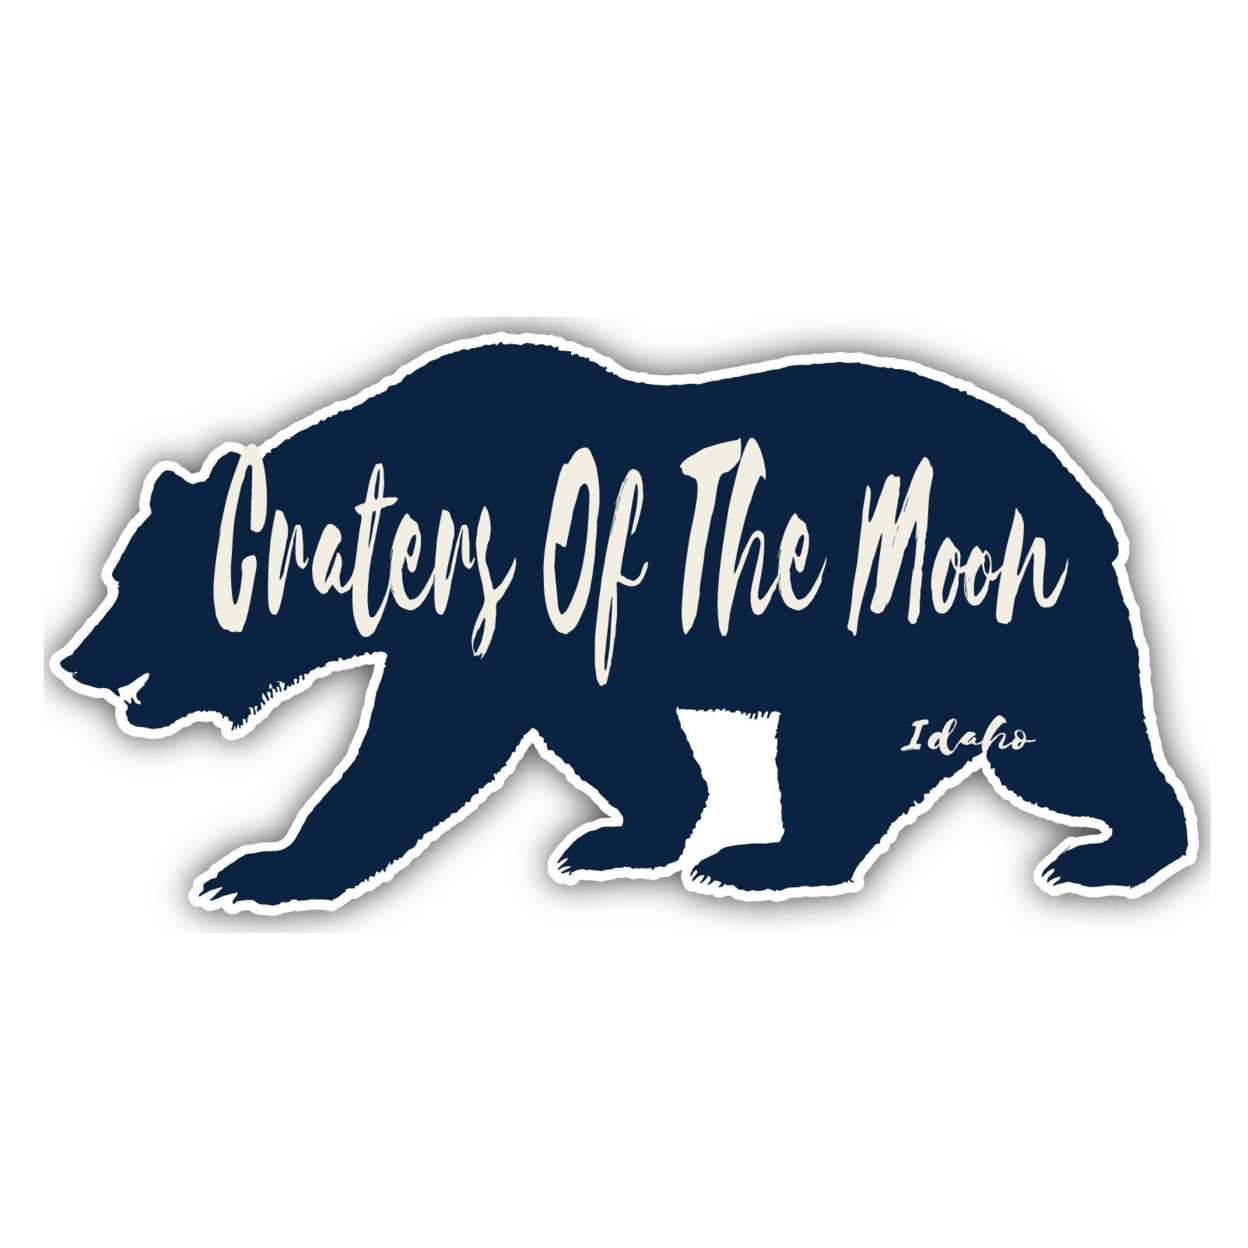 Craters Of The Moon Idaho Souvenir Decorative Stickers (Choose Theme And Size) - 4-Pack, 6-Inch, Bear